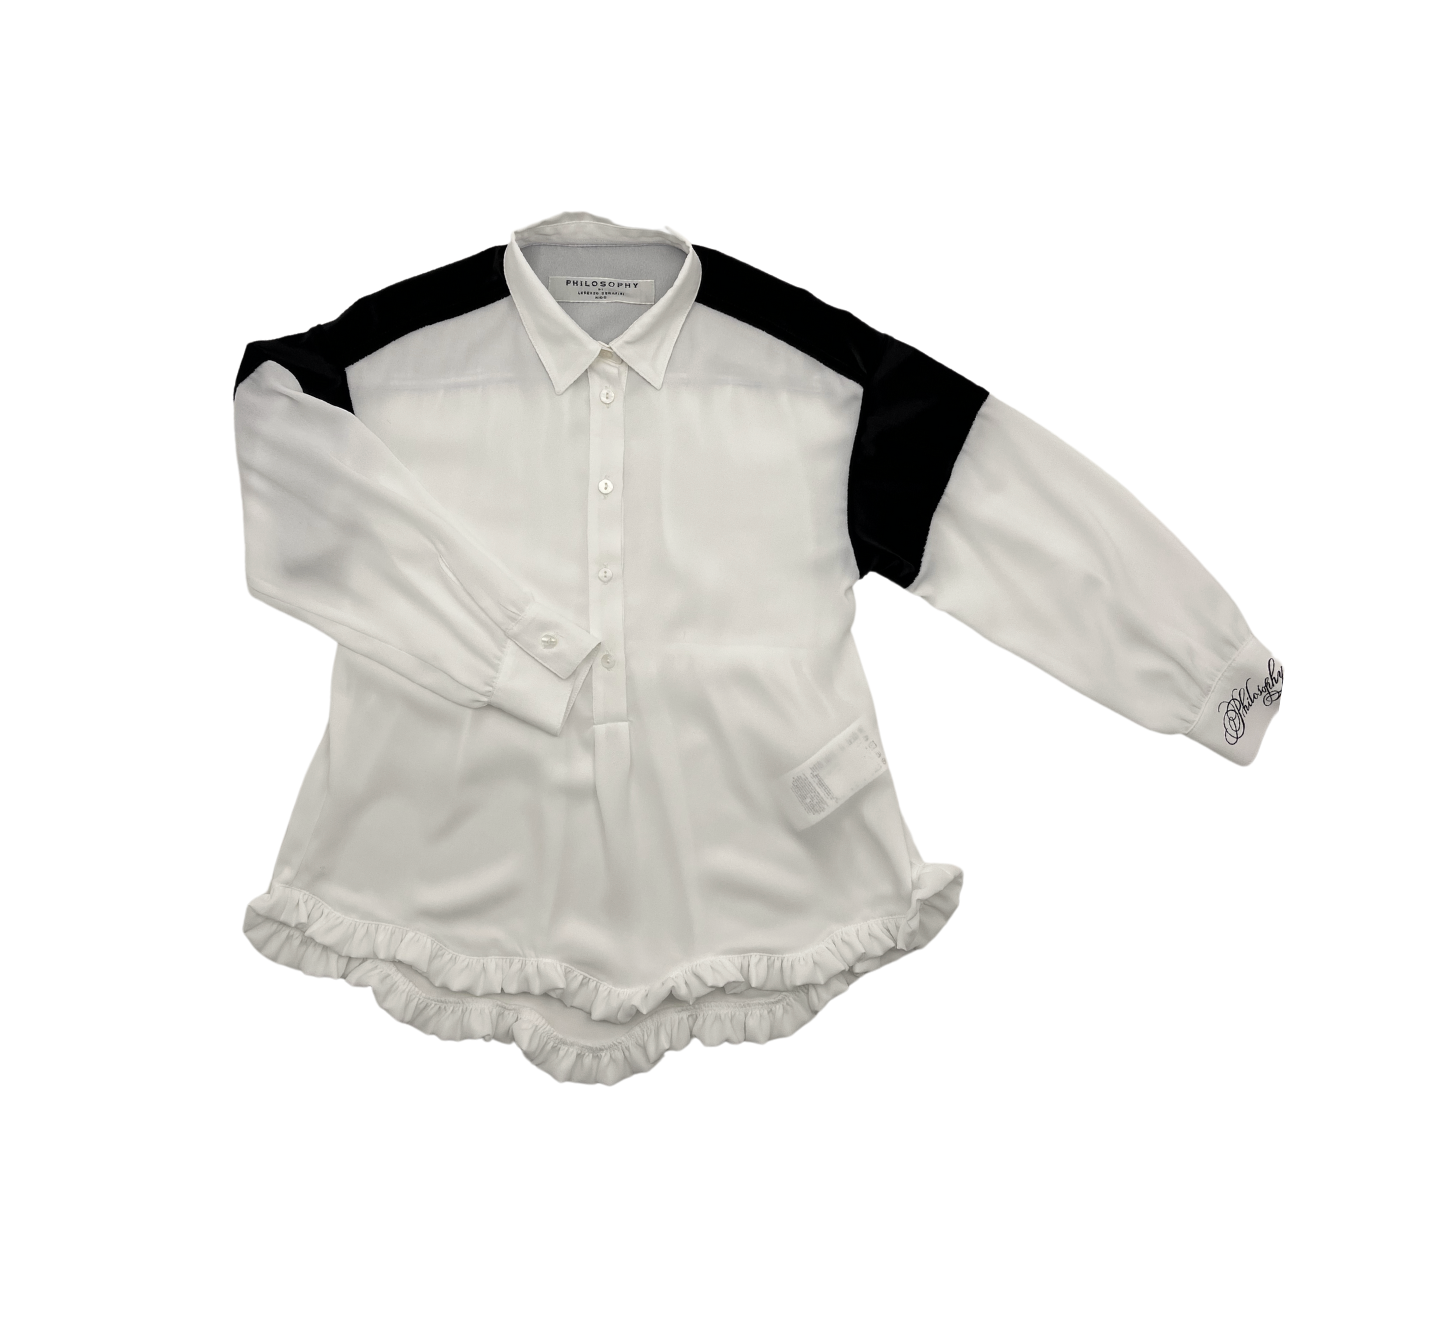 PHILOSOPHY DI LORENZO - Black &amp; white blouse with ruffle - 6 years old